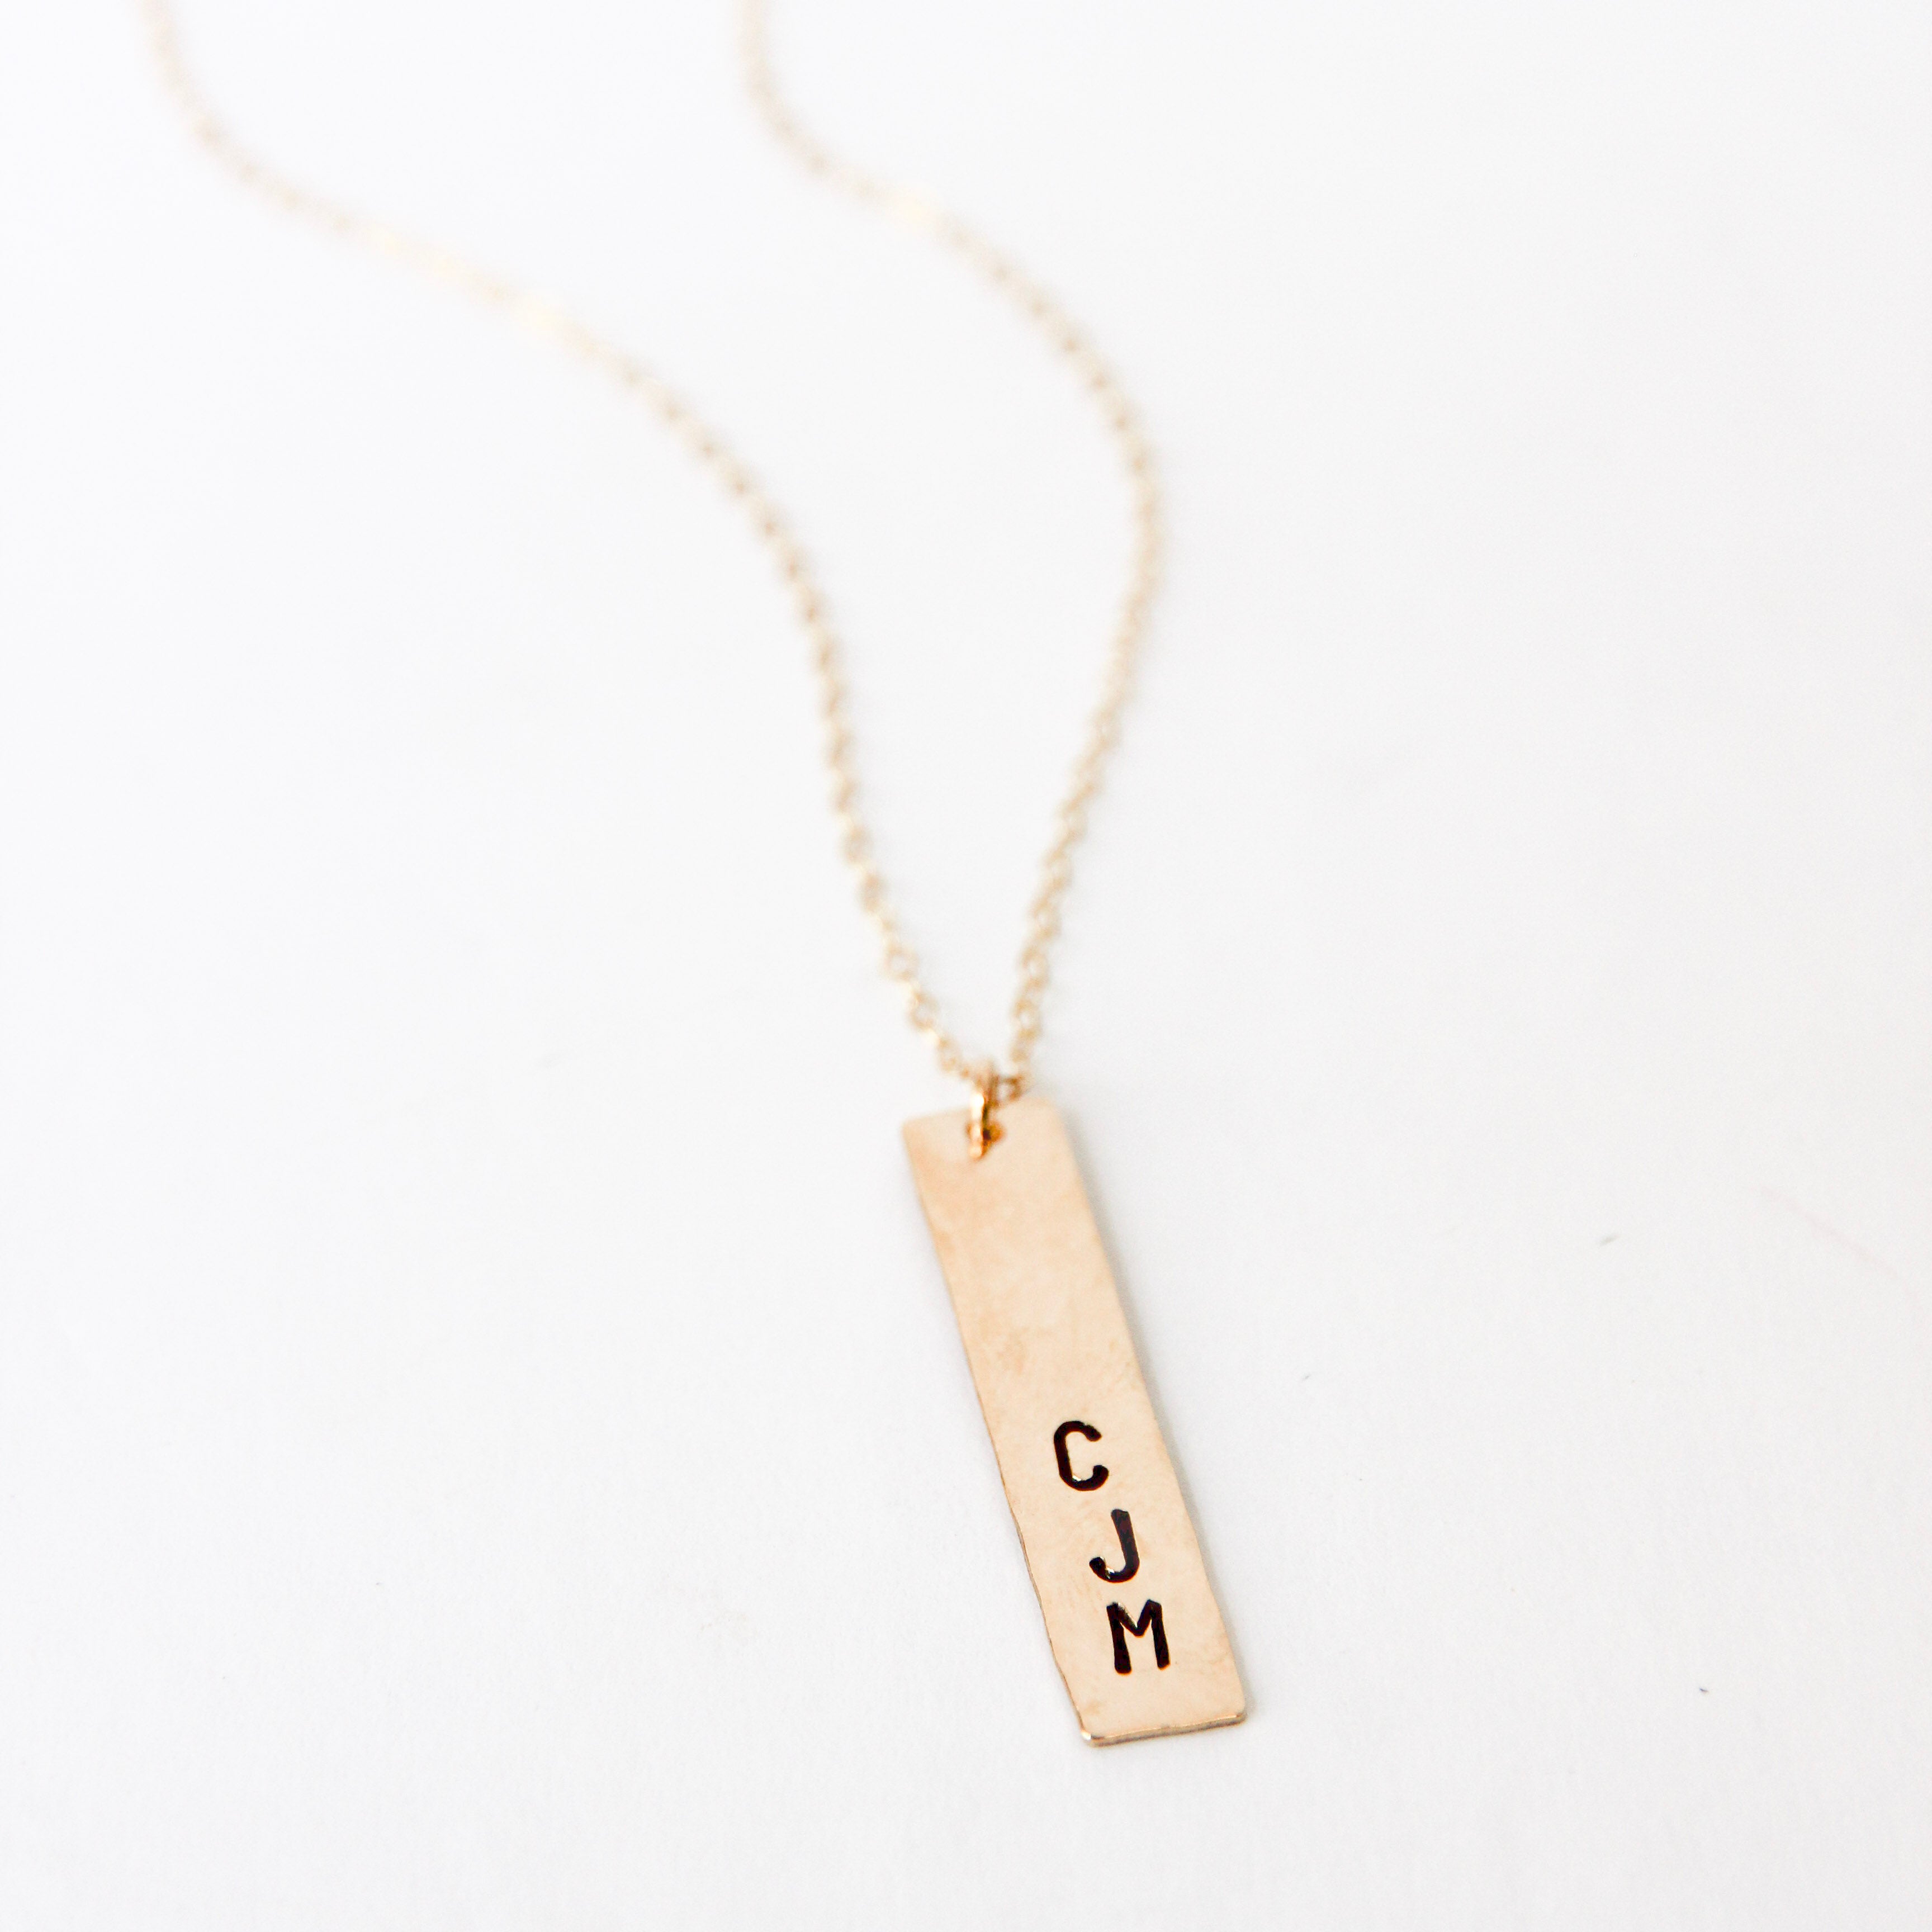 One inch long gold vertical bar with three initials stamped on the end of the bar. Attached to a gold chain. 